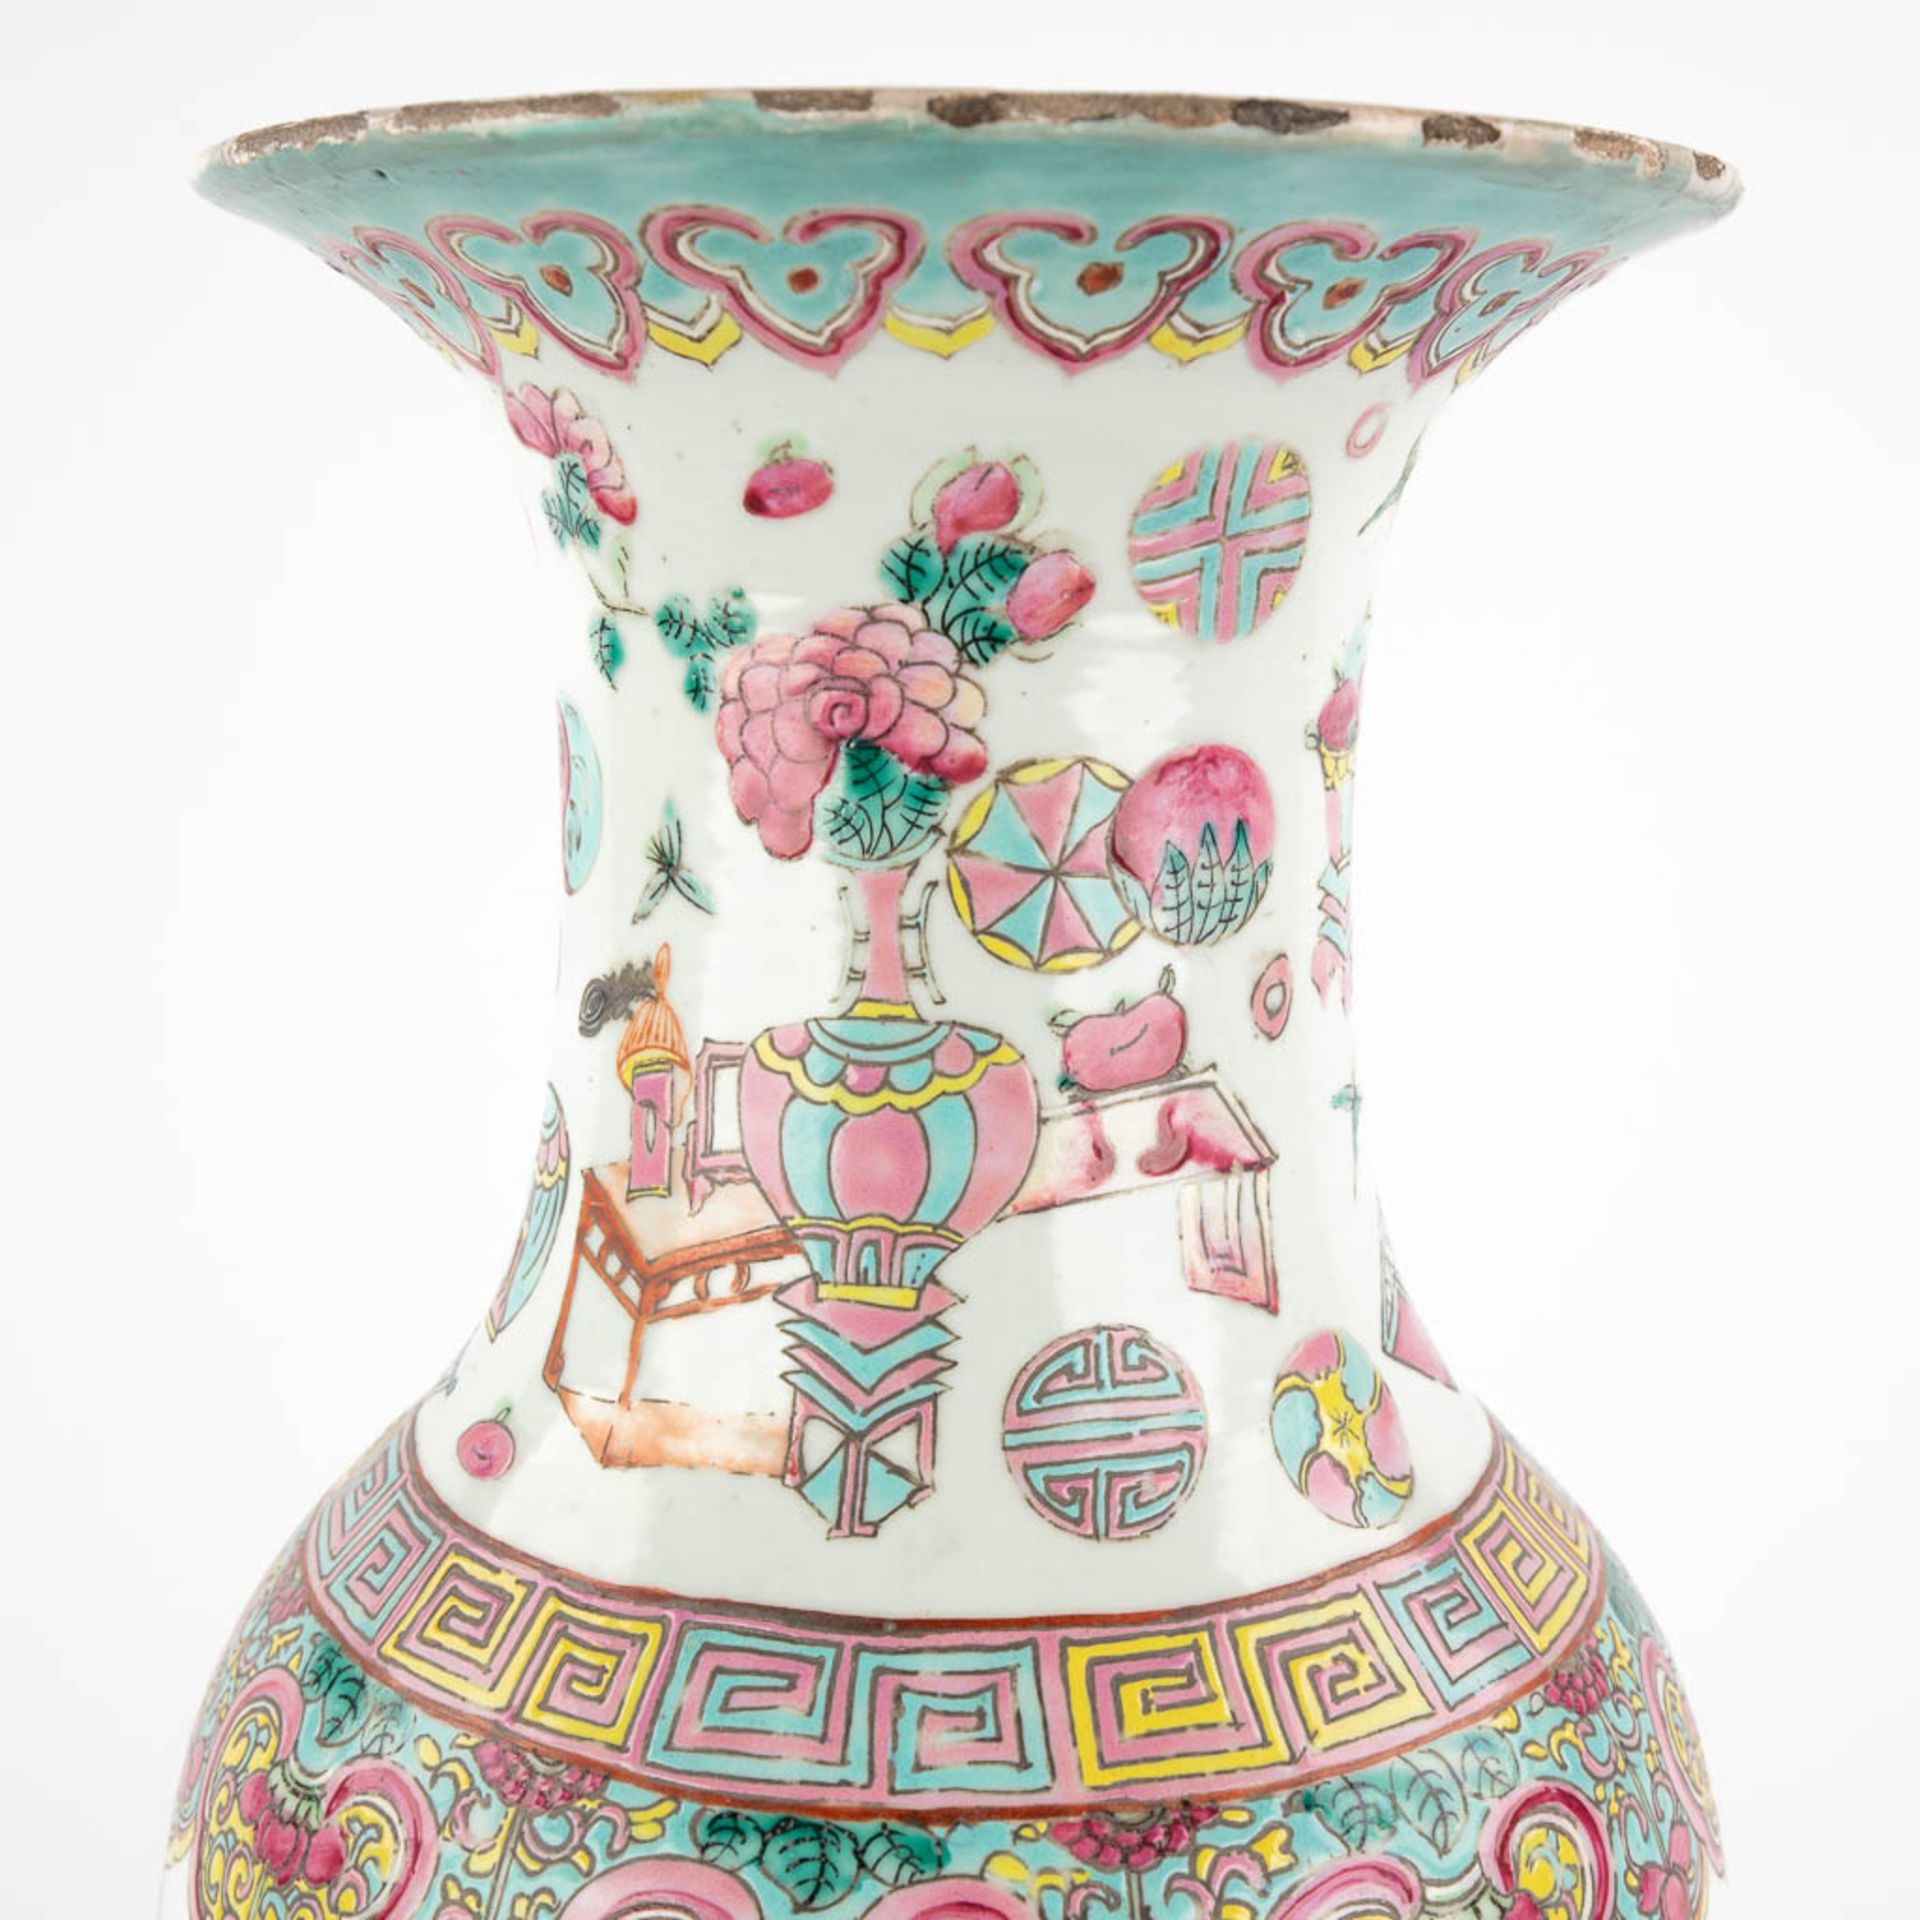 A Chinese vase with a decor of antiquities. 19th/20th C. (H:44 x D:21 cm) - Image 8 of 11